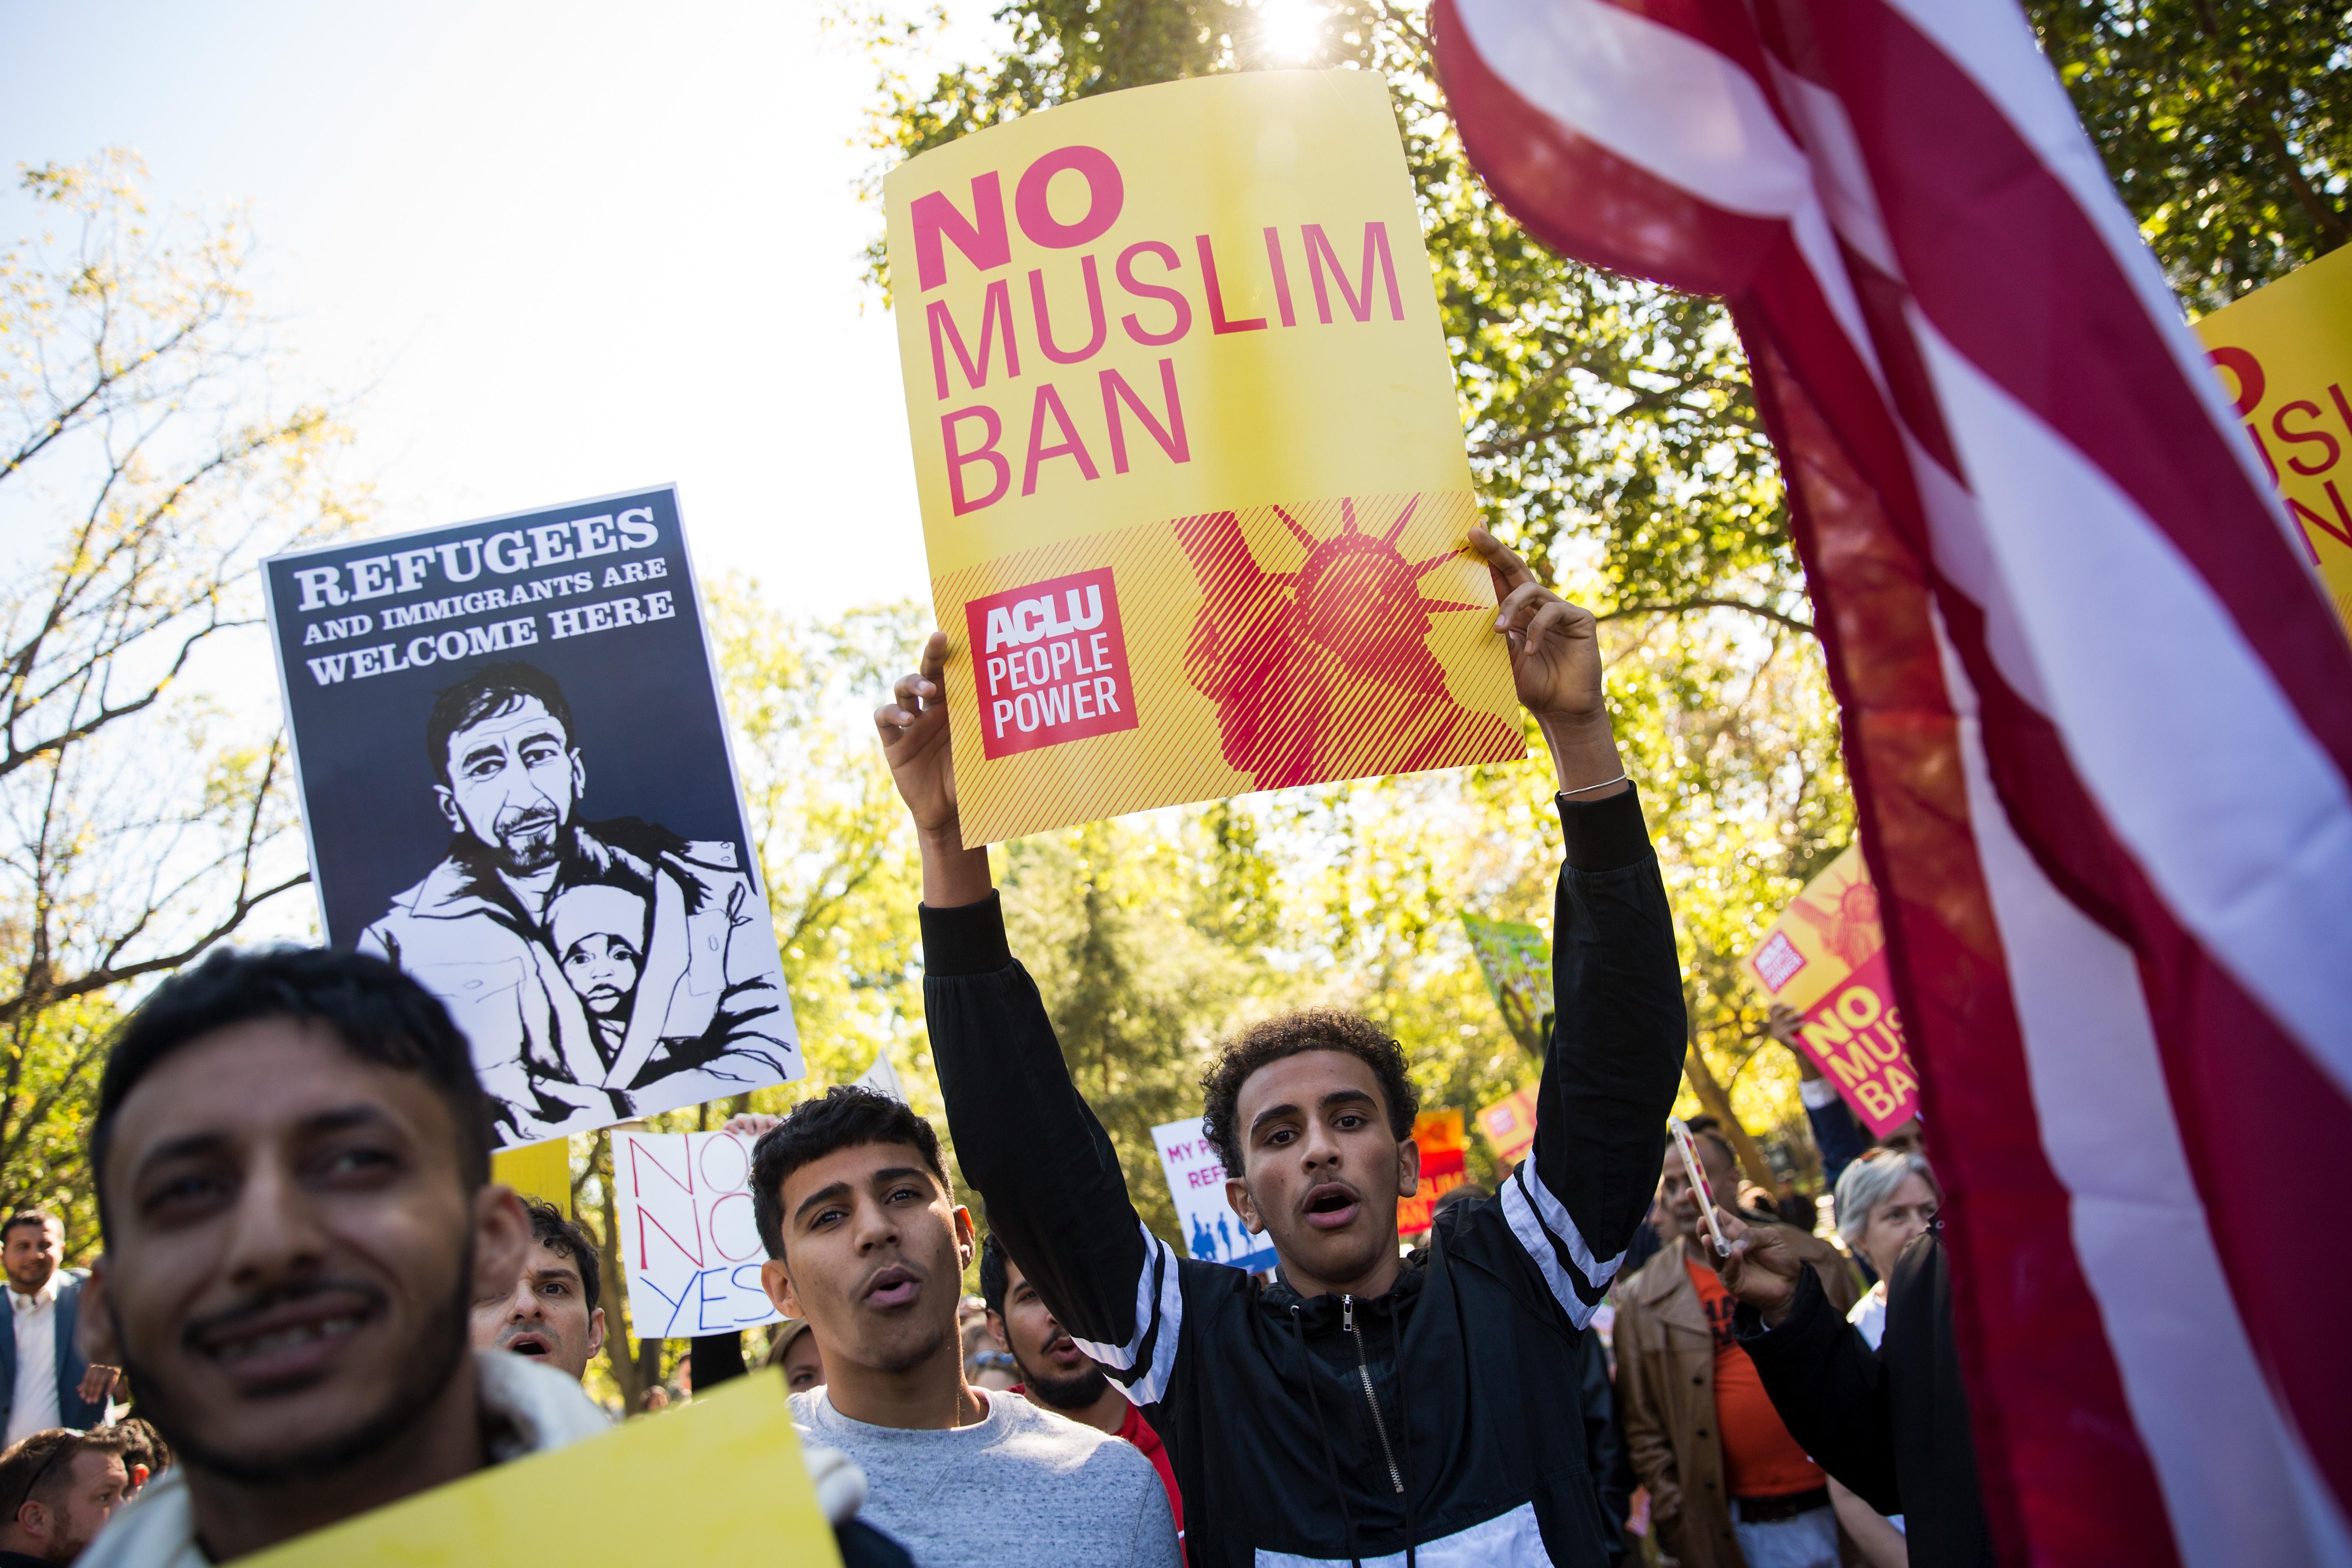 WASHINGTON, DC - OCTOBER 18: Activists rally in Lafayette Park during a protest against the Trump administration's proposed travel ban, October 18, 2017 in Washington, DC. Early Wednesday morning, a federal judge in Maryland granted a motion for a preliminary injunction on the administration's travel ban. This is the Trump administration's third attempt to restrict entry into the United States for citizens from mostly Muslim-majority countries. The Department of Justice said it plans to appeal and the White House issued a statement calling the judge's decision 'dangerously flawed.' (Photo by Drew Angerer/Getty Images)